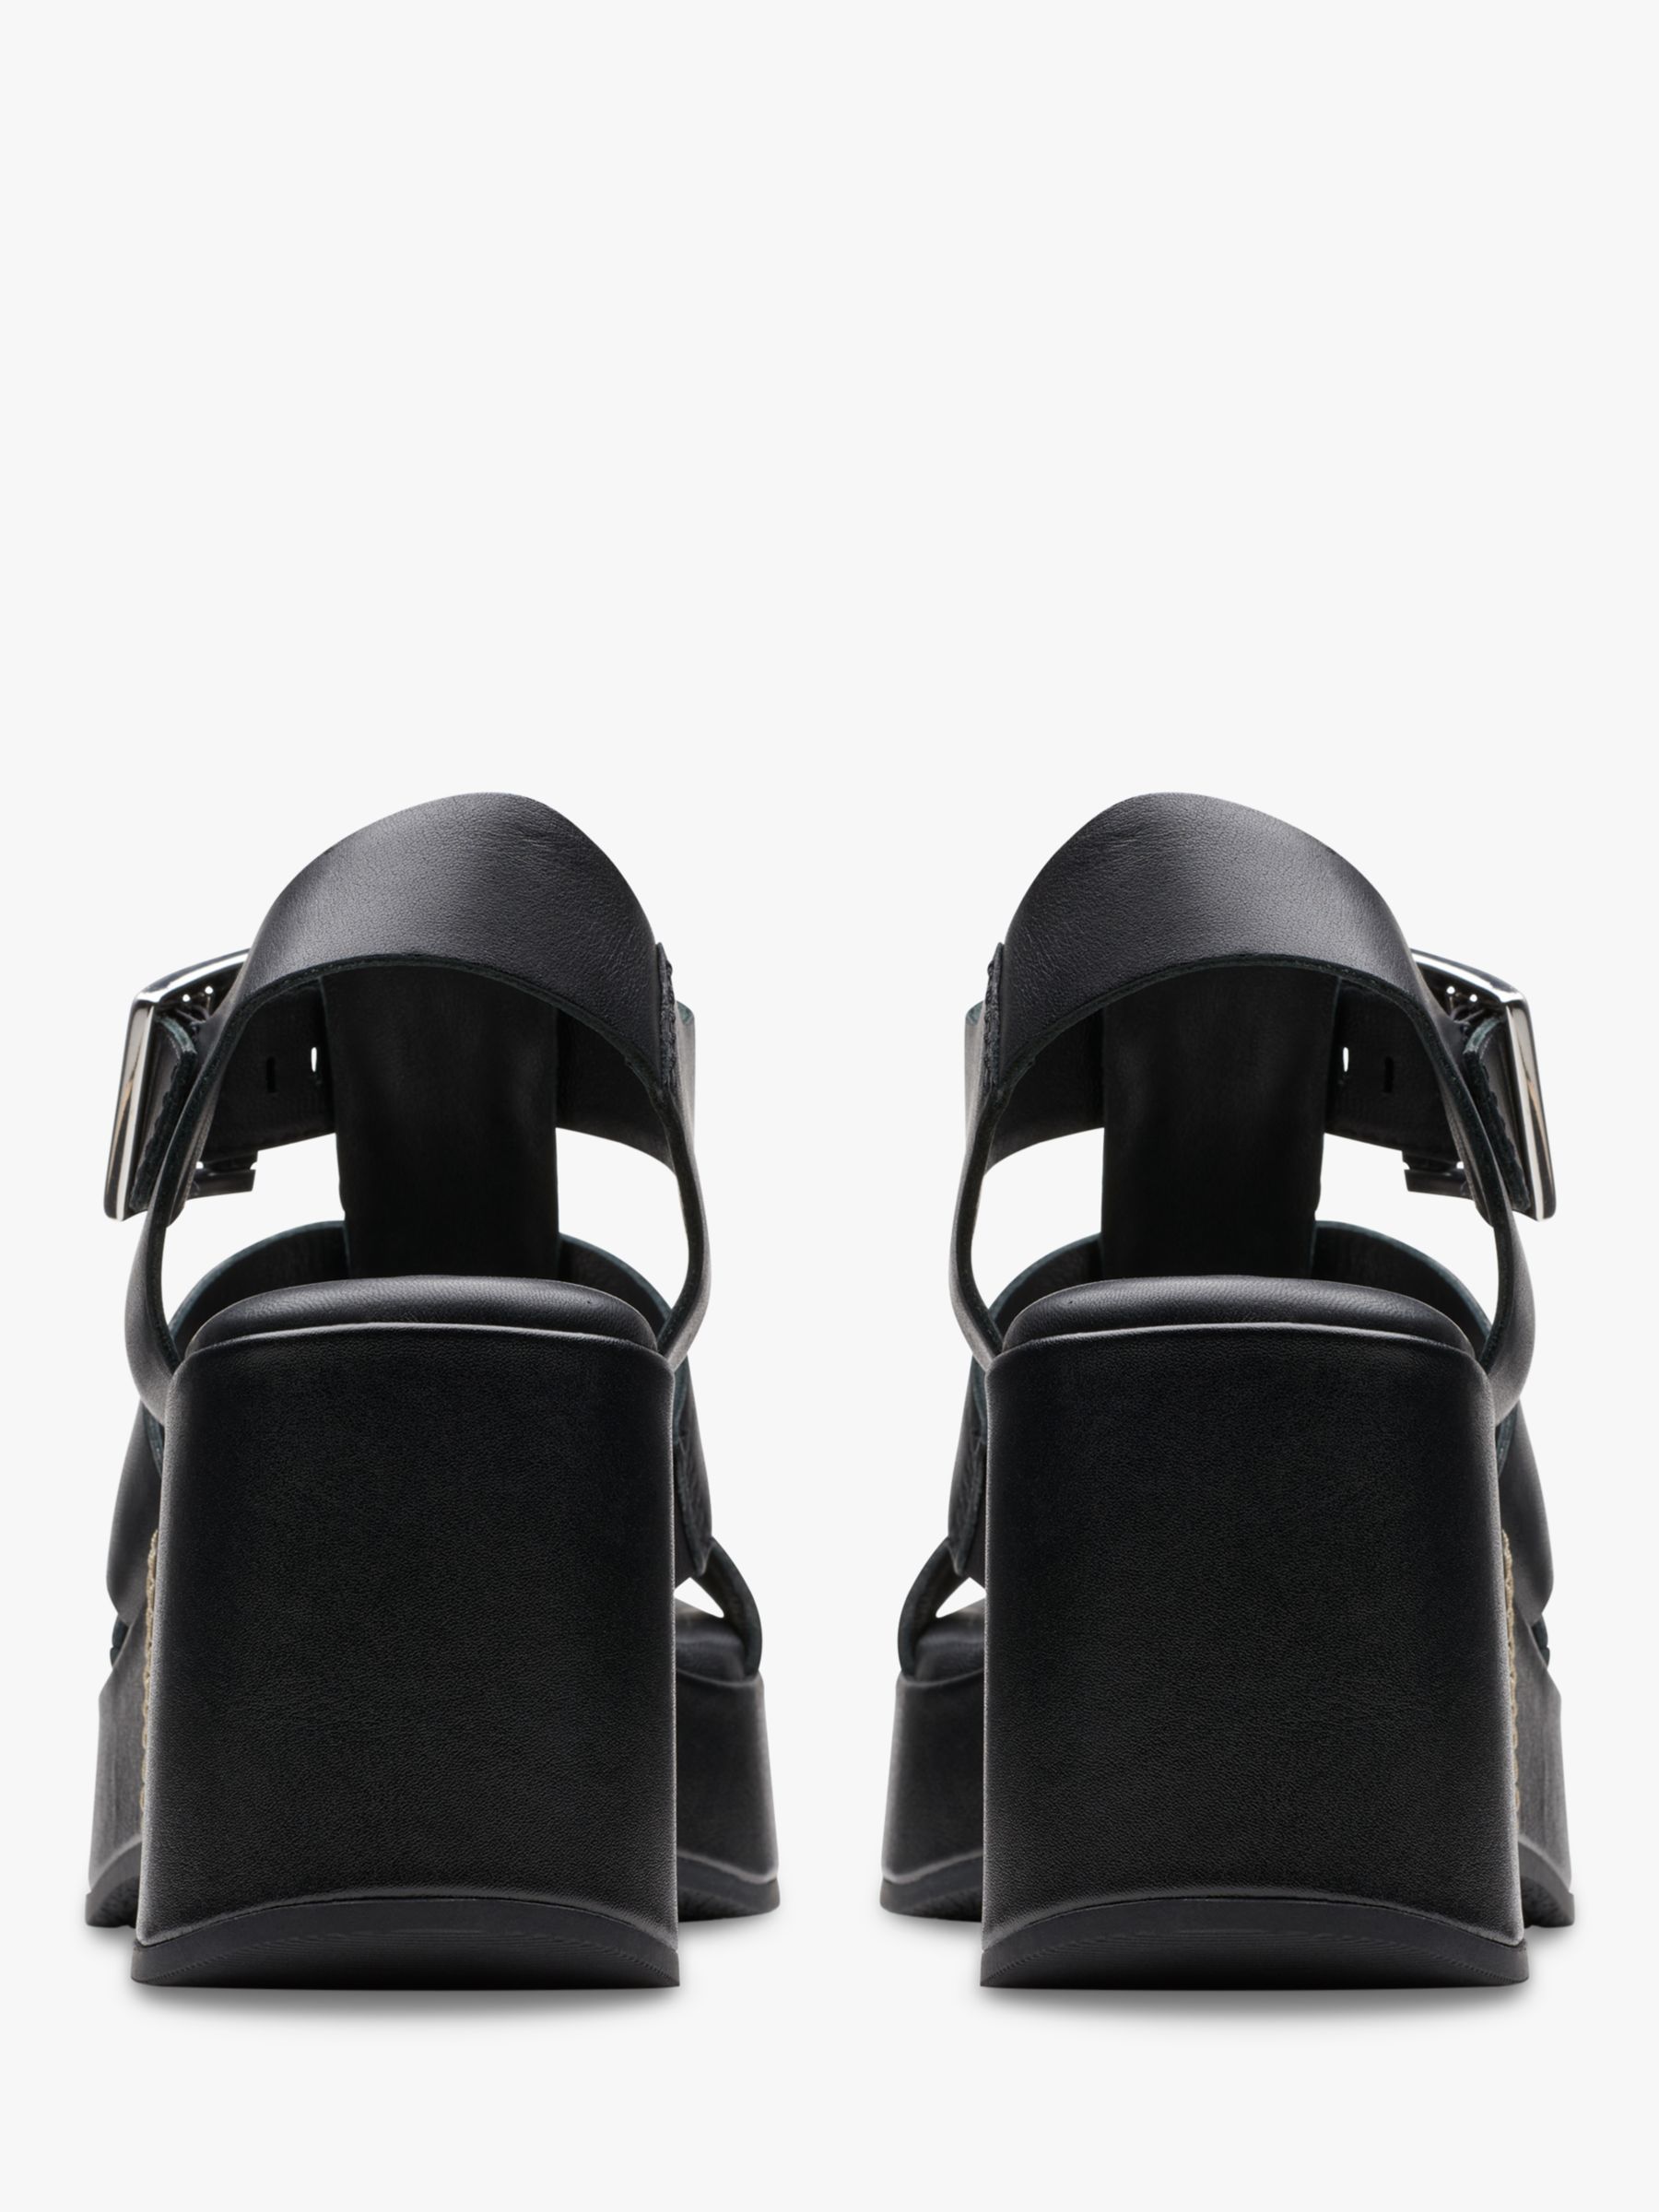 Buy Clarks Manon Cove Leather Wedge Sandals Online at johnlewis.com